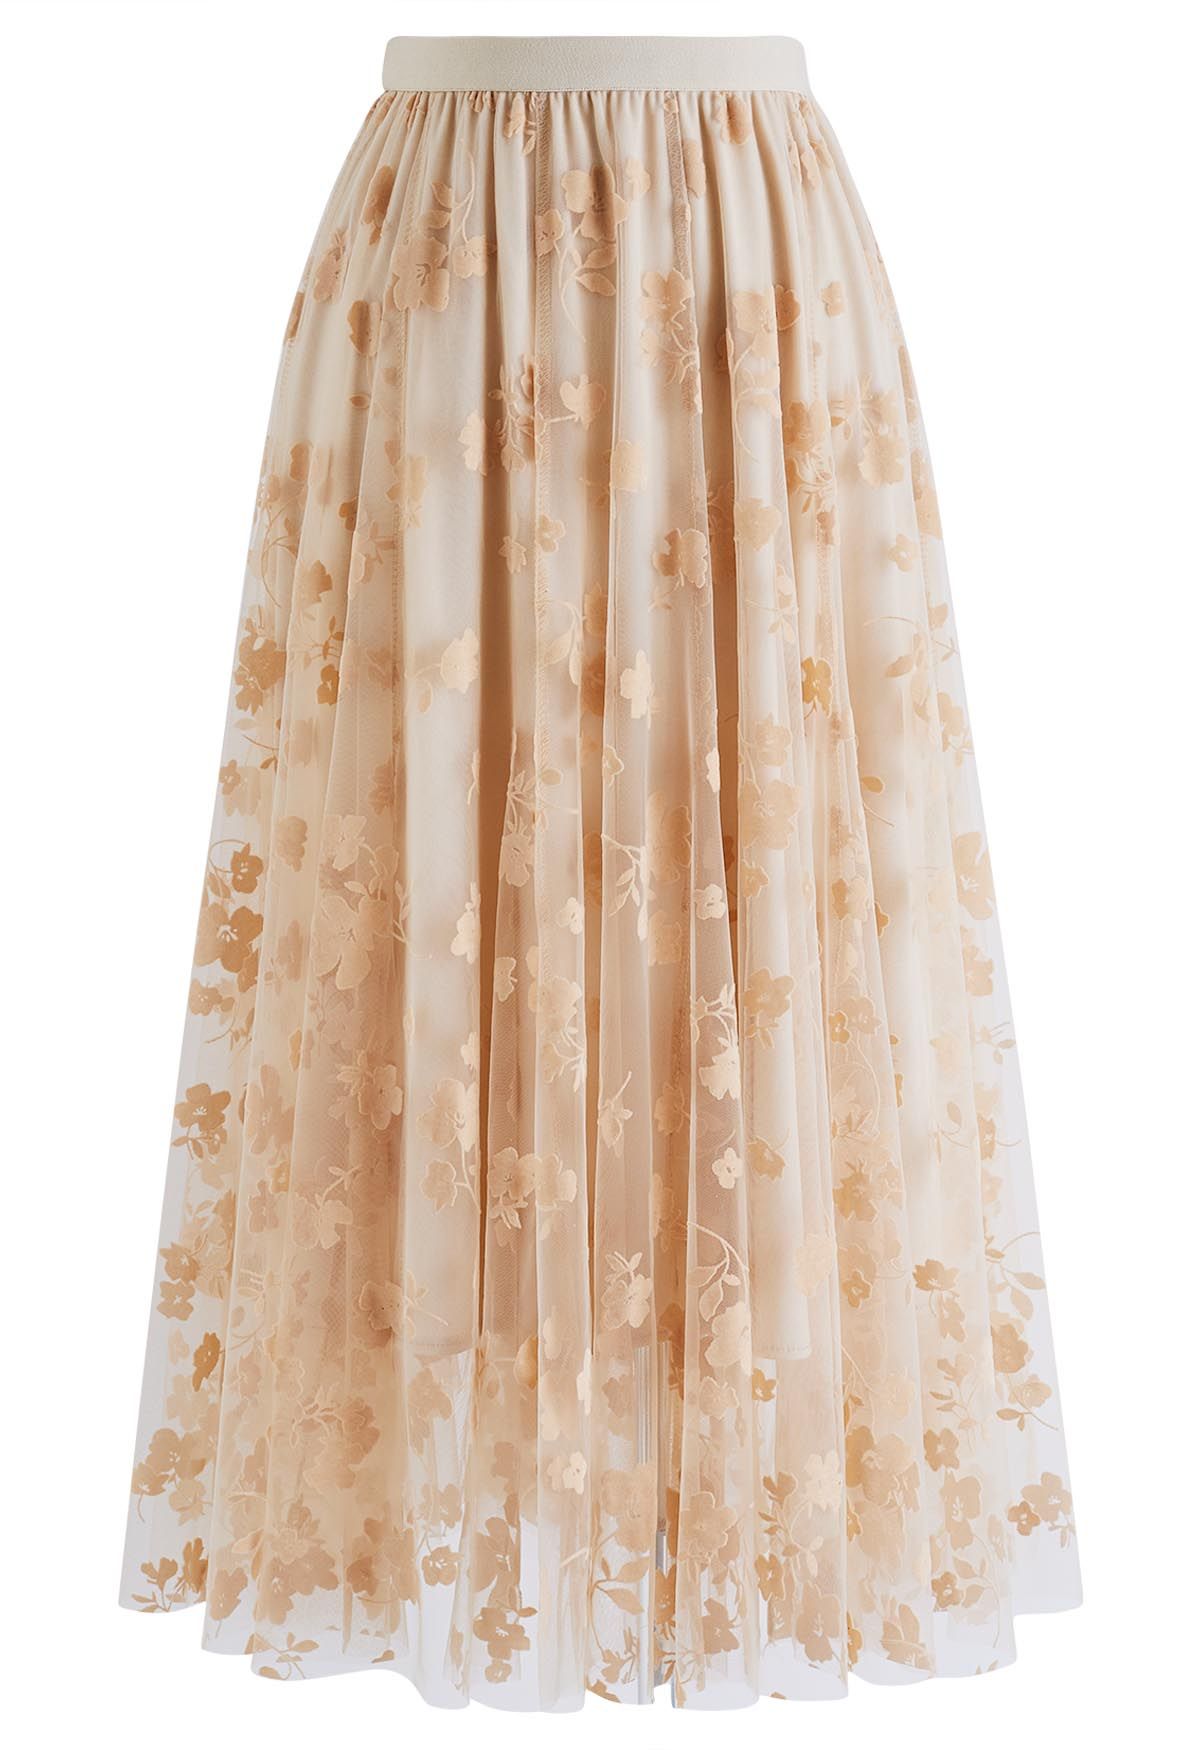 3D Posy Double-Layered Mesh Midi Skirt in Light Tan - Retro, Indie and  Unique Fashion